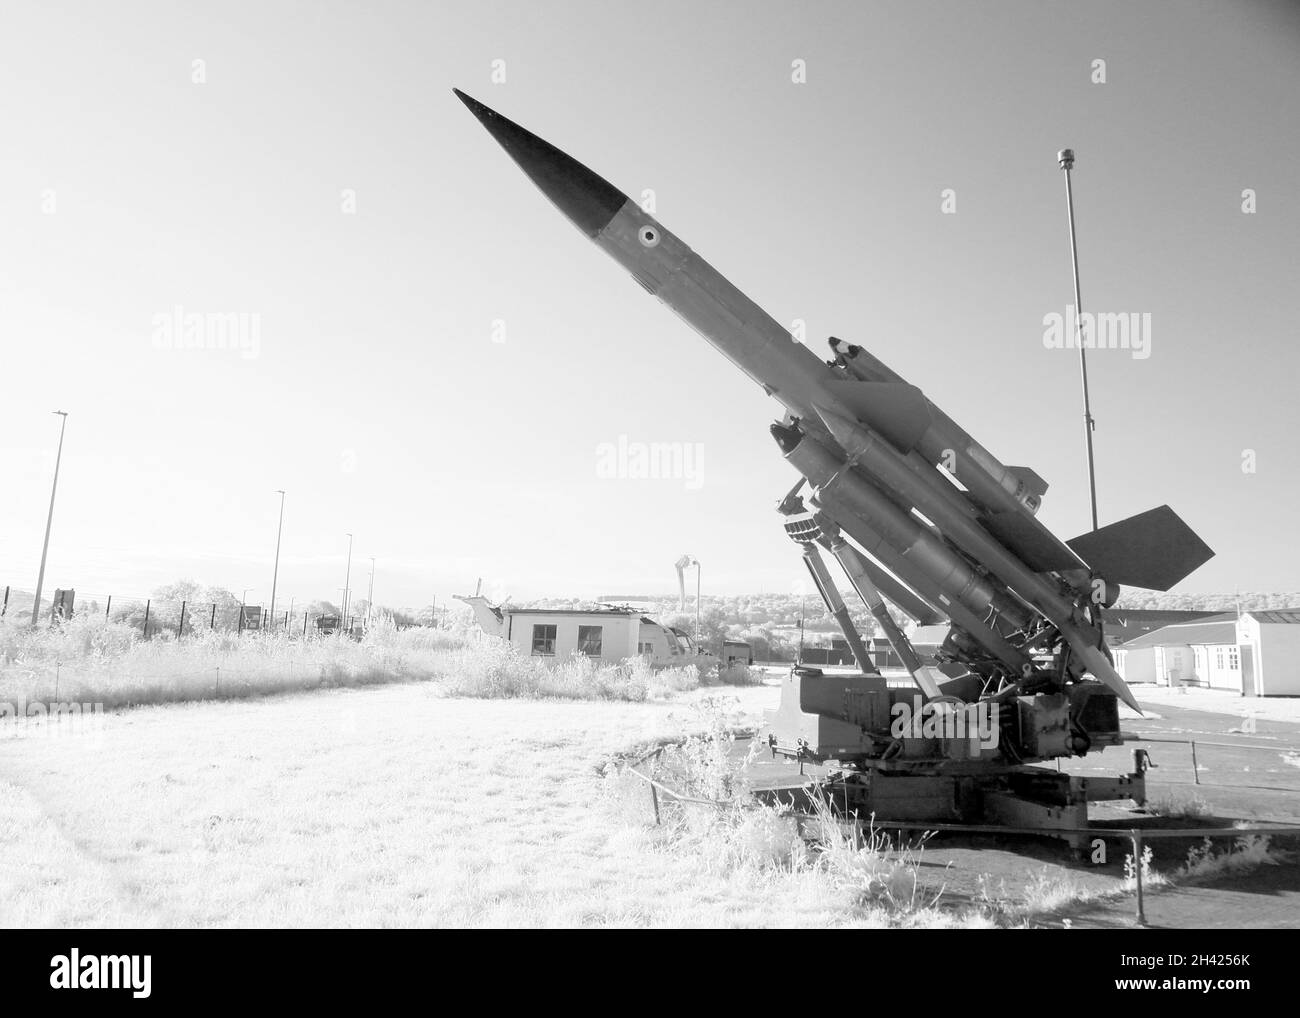 August 2021 - Infrared photograph of a Bristol Bloodhound missile from the cold war days at the helicopter museum in Weston super Mare, England, UK Stock Photo